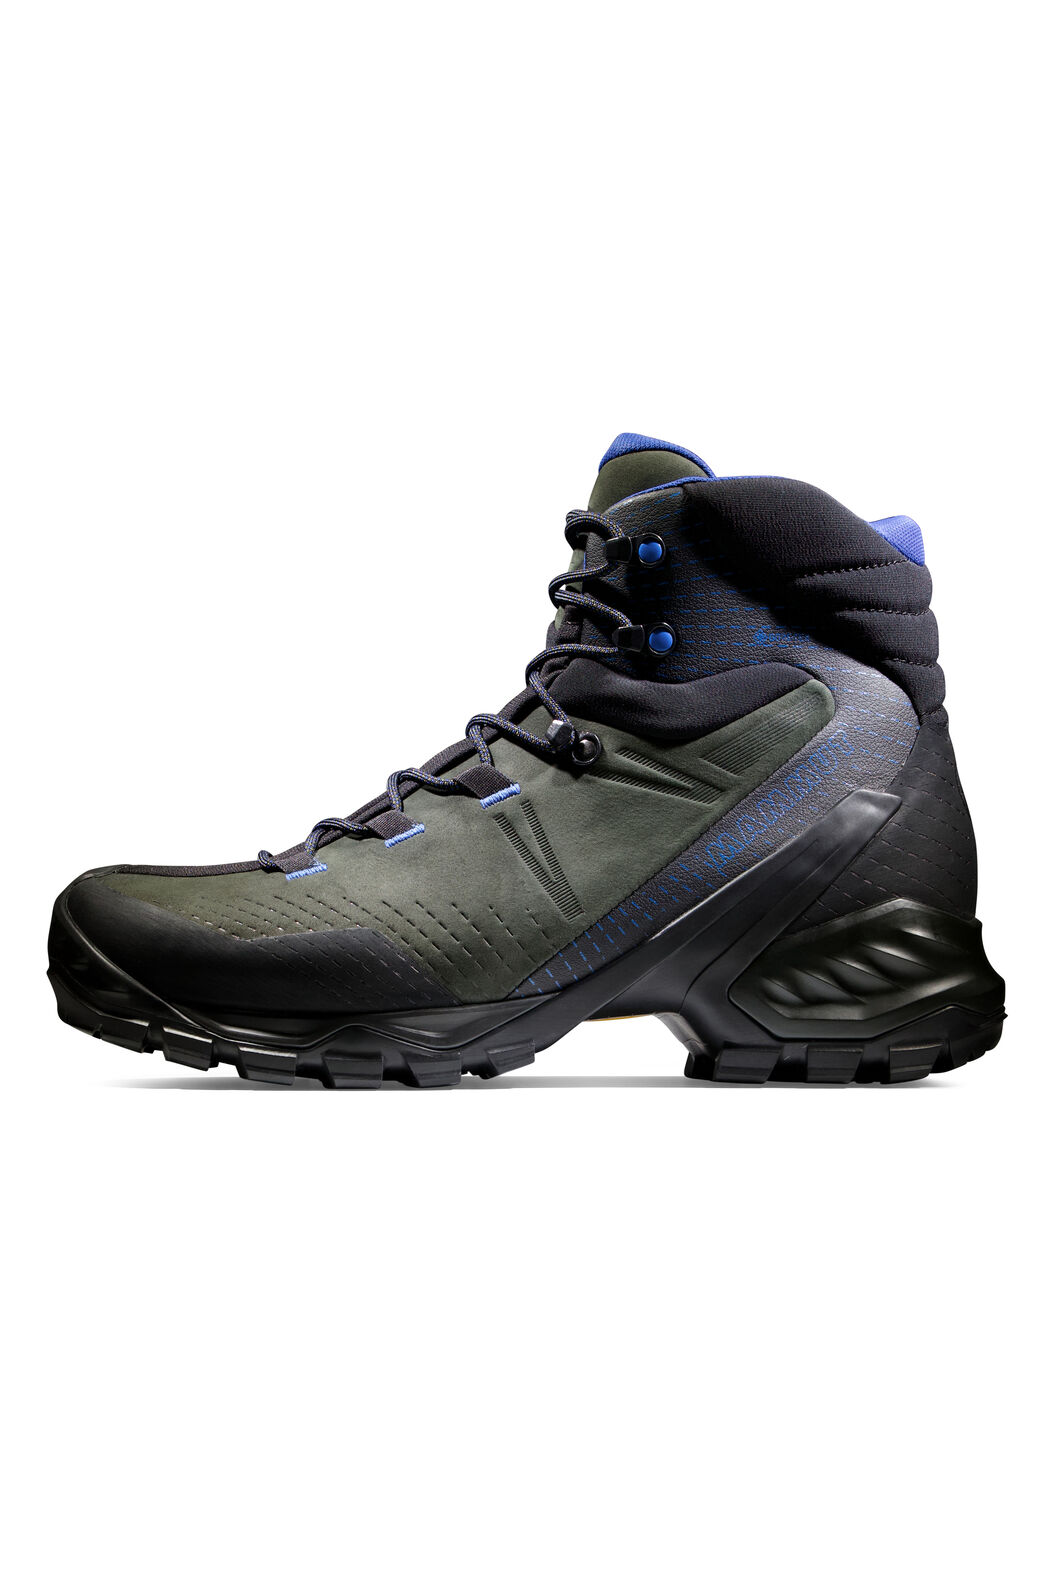 Mammut Trovat Tour High GTX Hiking Shoes - Men's with Free S&H